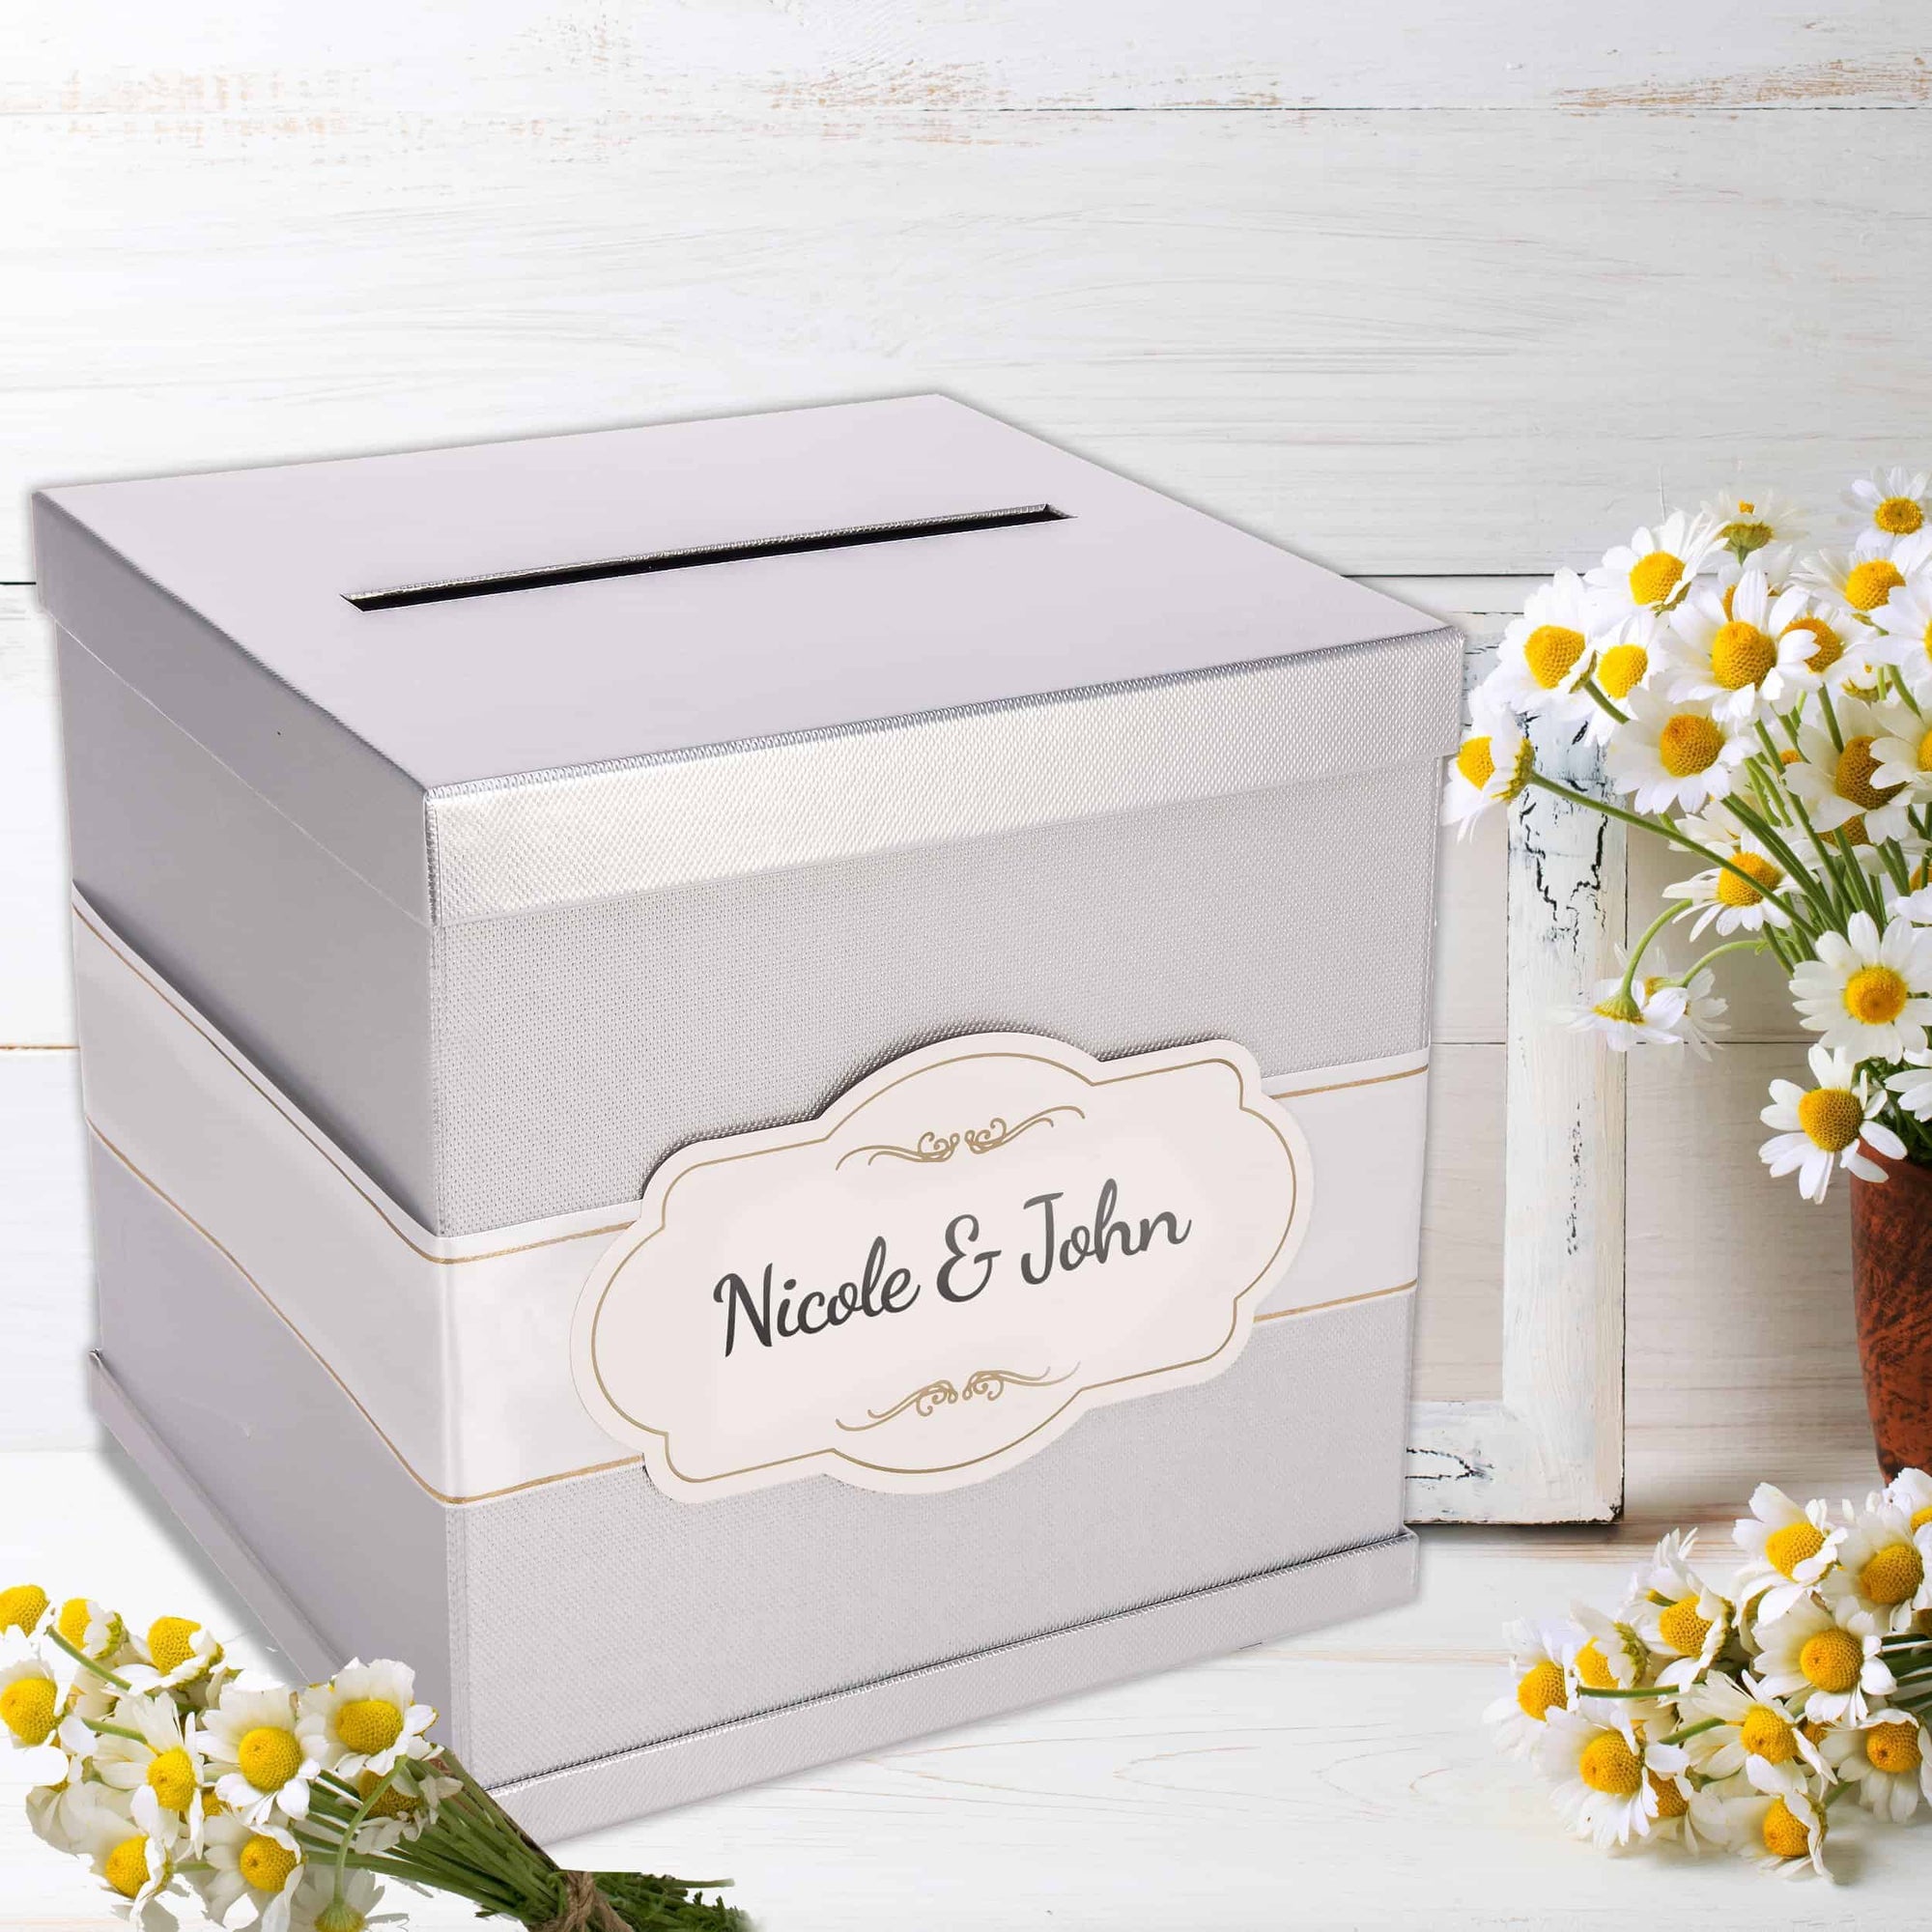 Gift Card Box - Merry Expressions